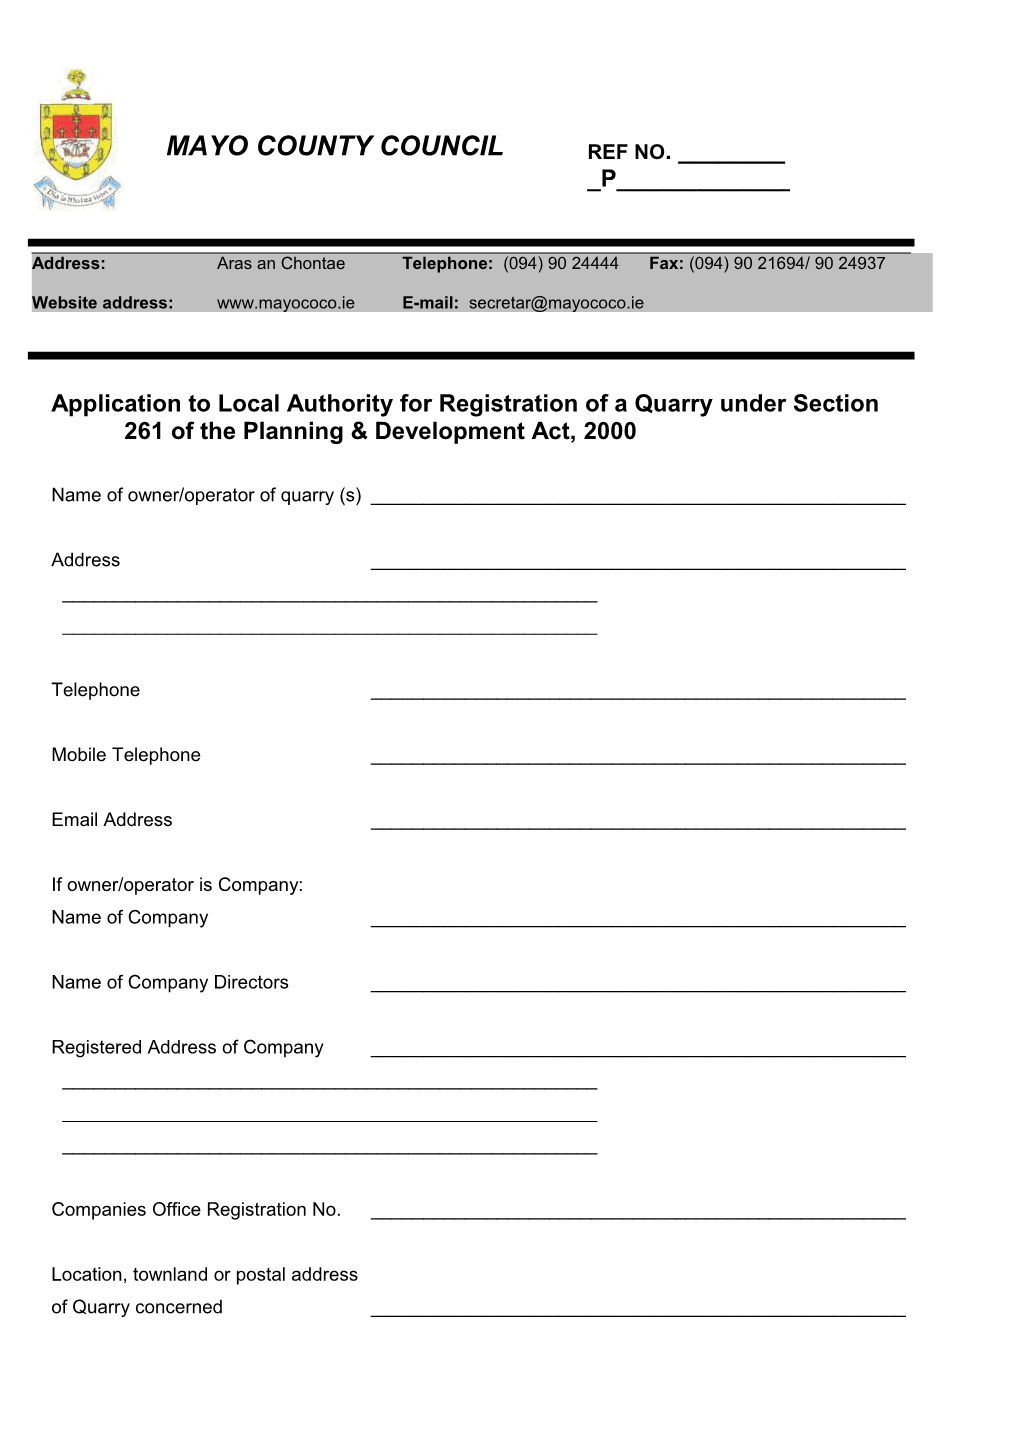 Application to Local Authority for Registration of a Quarry Under Section 261 of the Planning